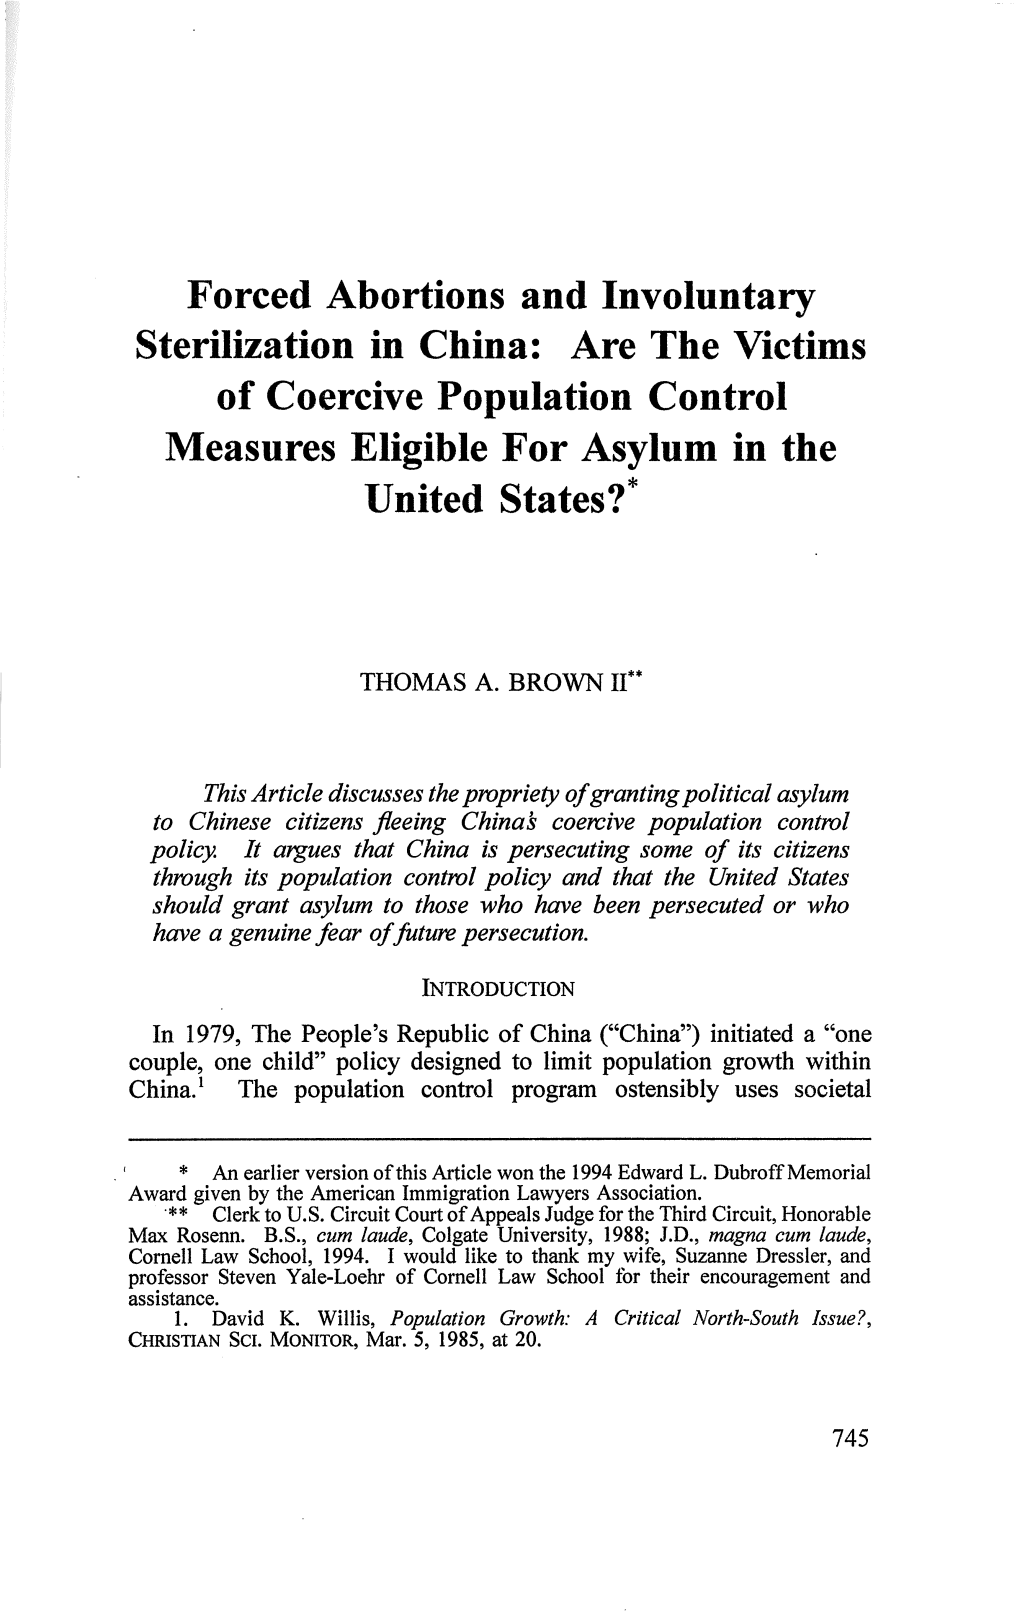 Forced Abortions and Involuntary Sterlization in China: Are the Victims of Coercive Population Control Measures Eligible For